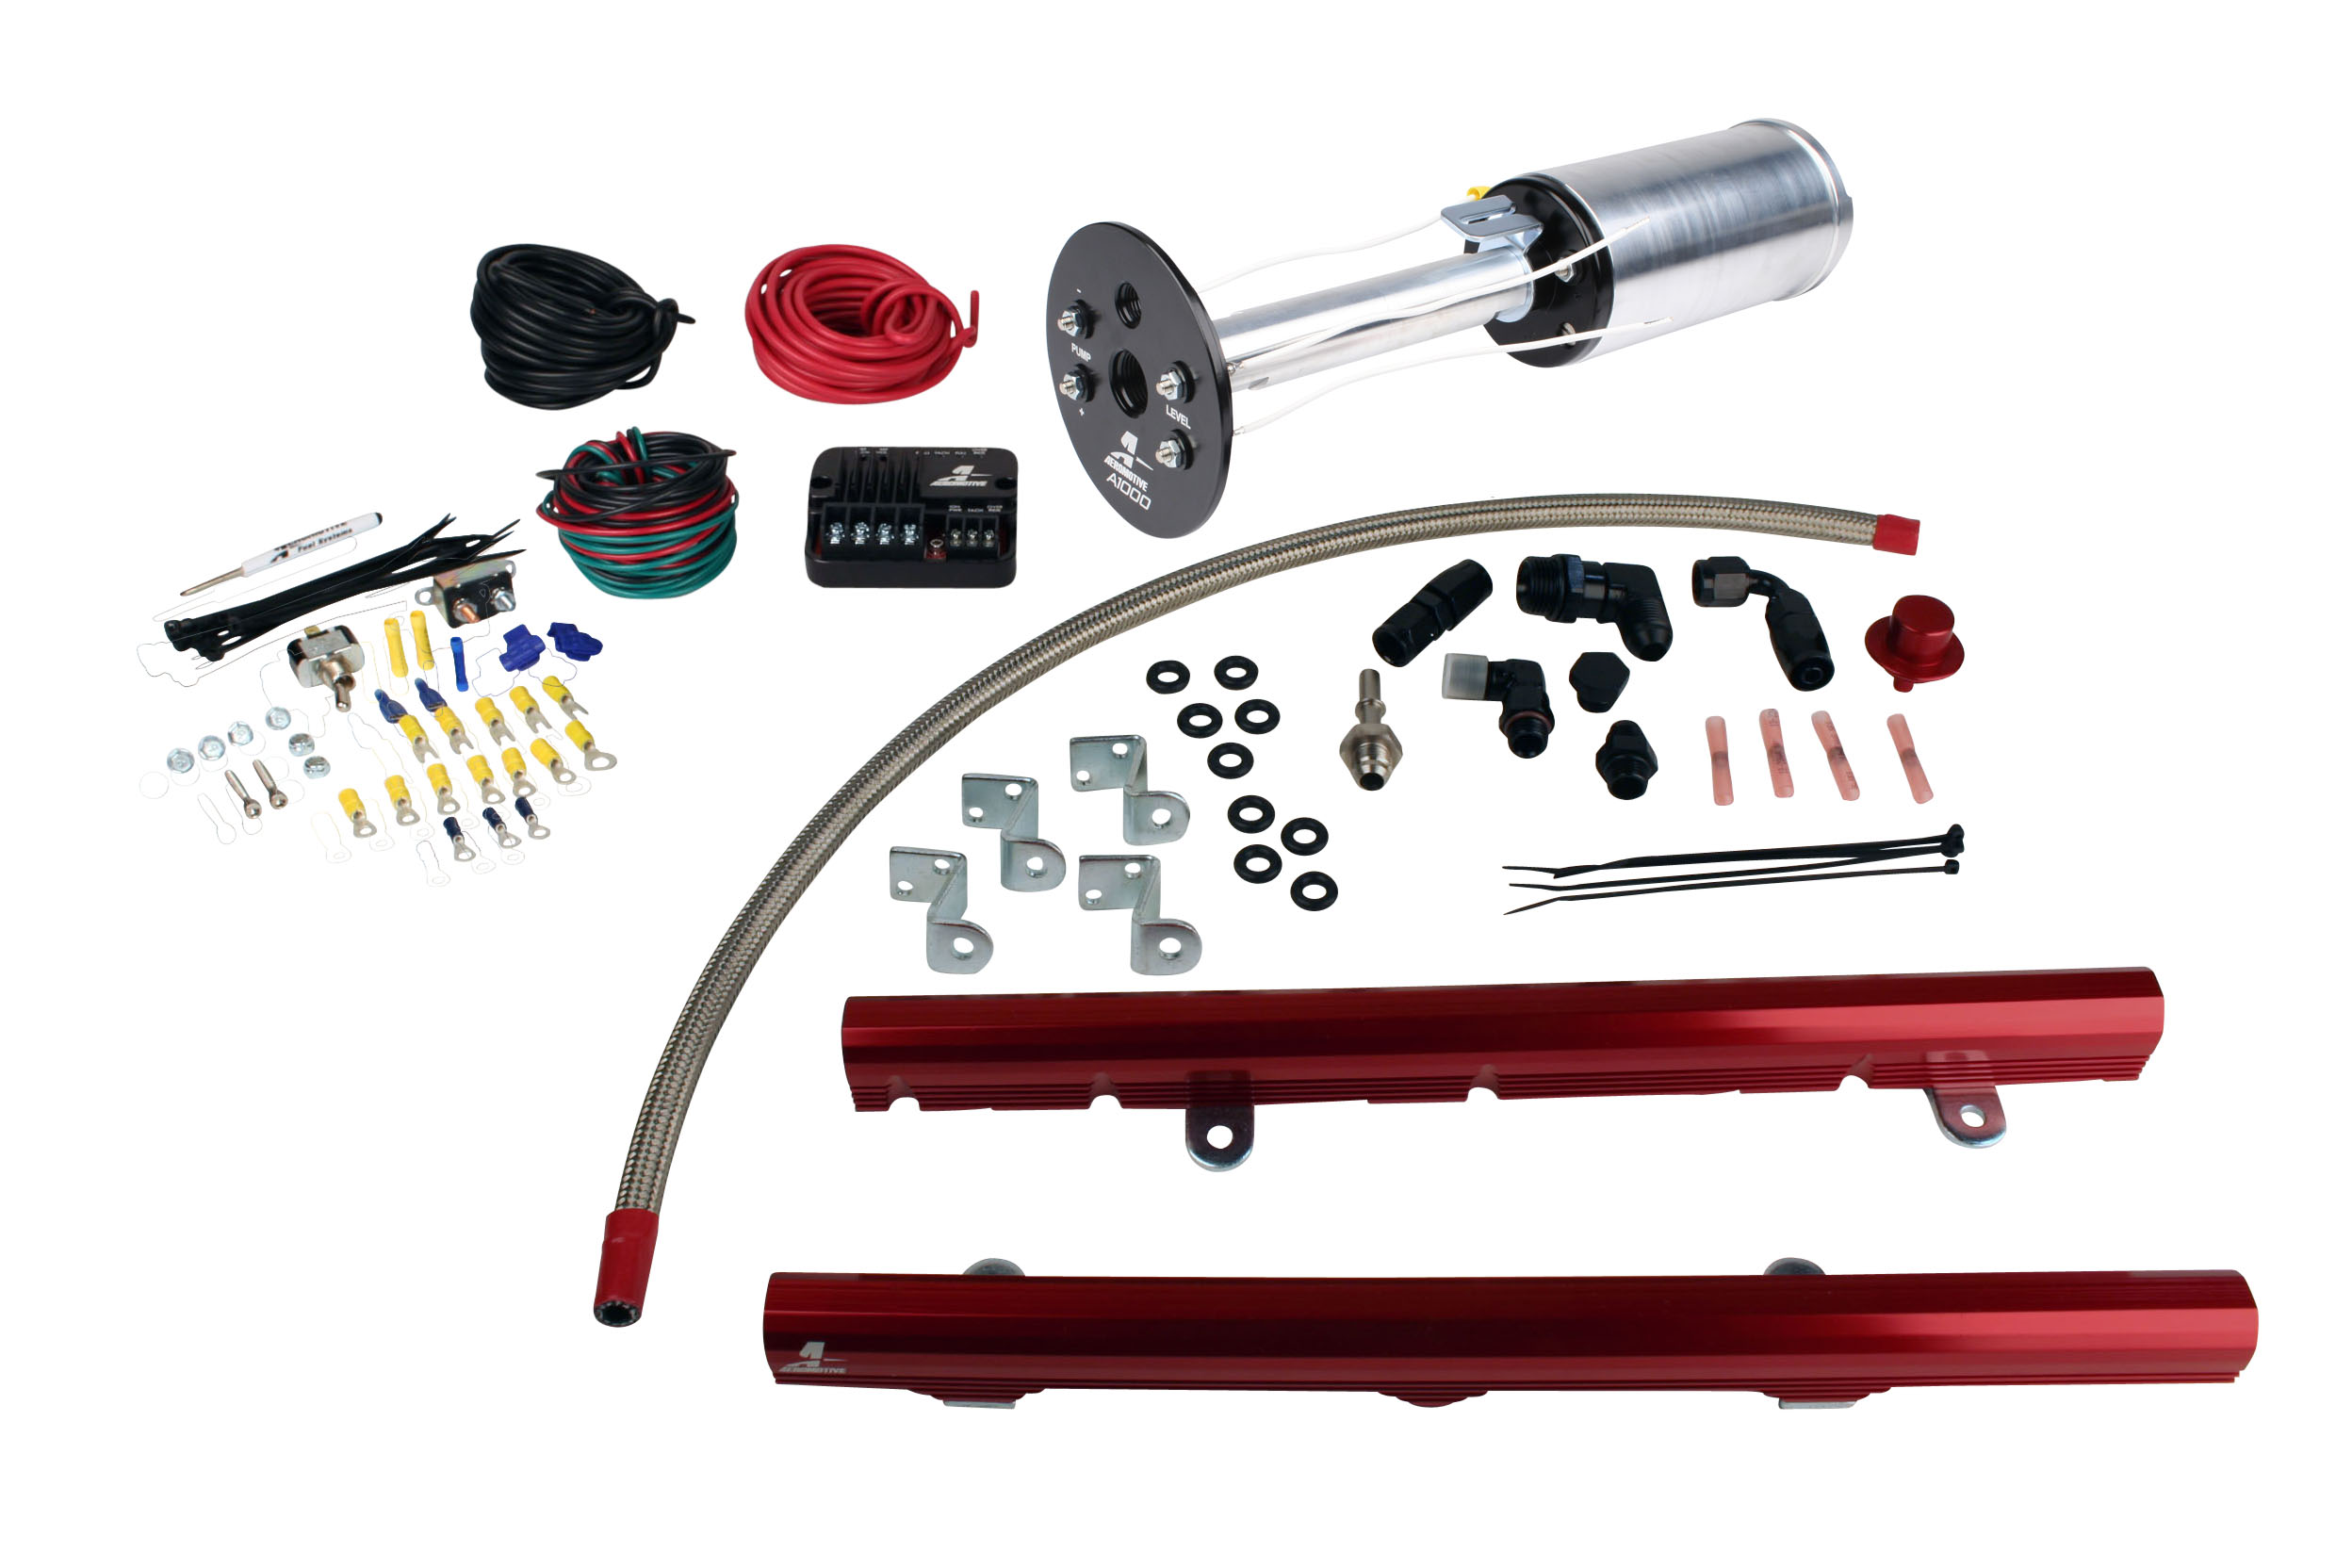 Corvette 2008-2013 Fuel System, A1000 Stealth, Fittings / Filters / Pump / Rails / Speed Controller, LS3